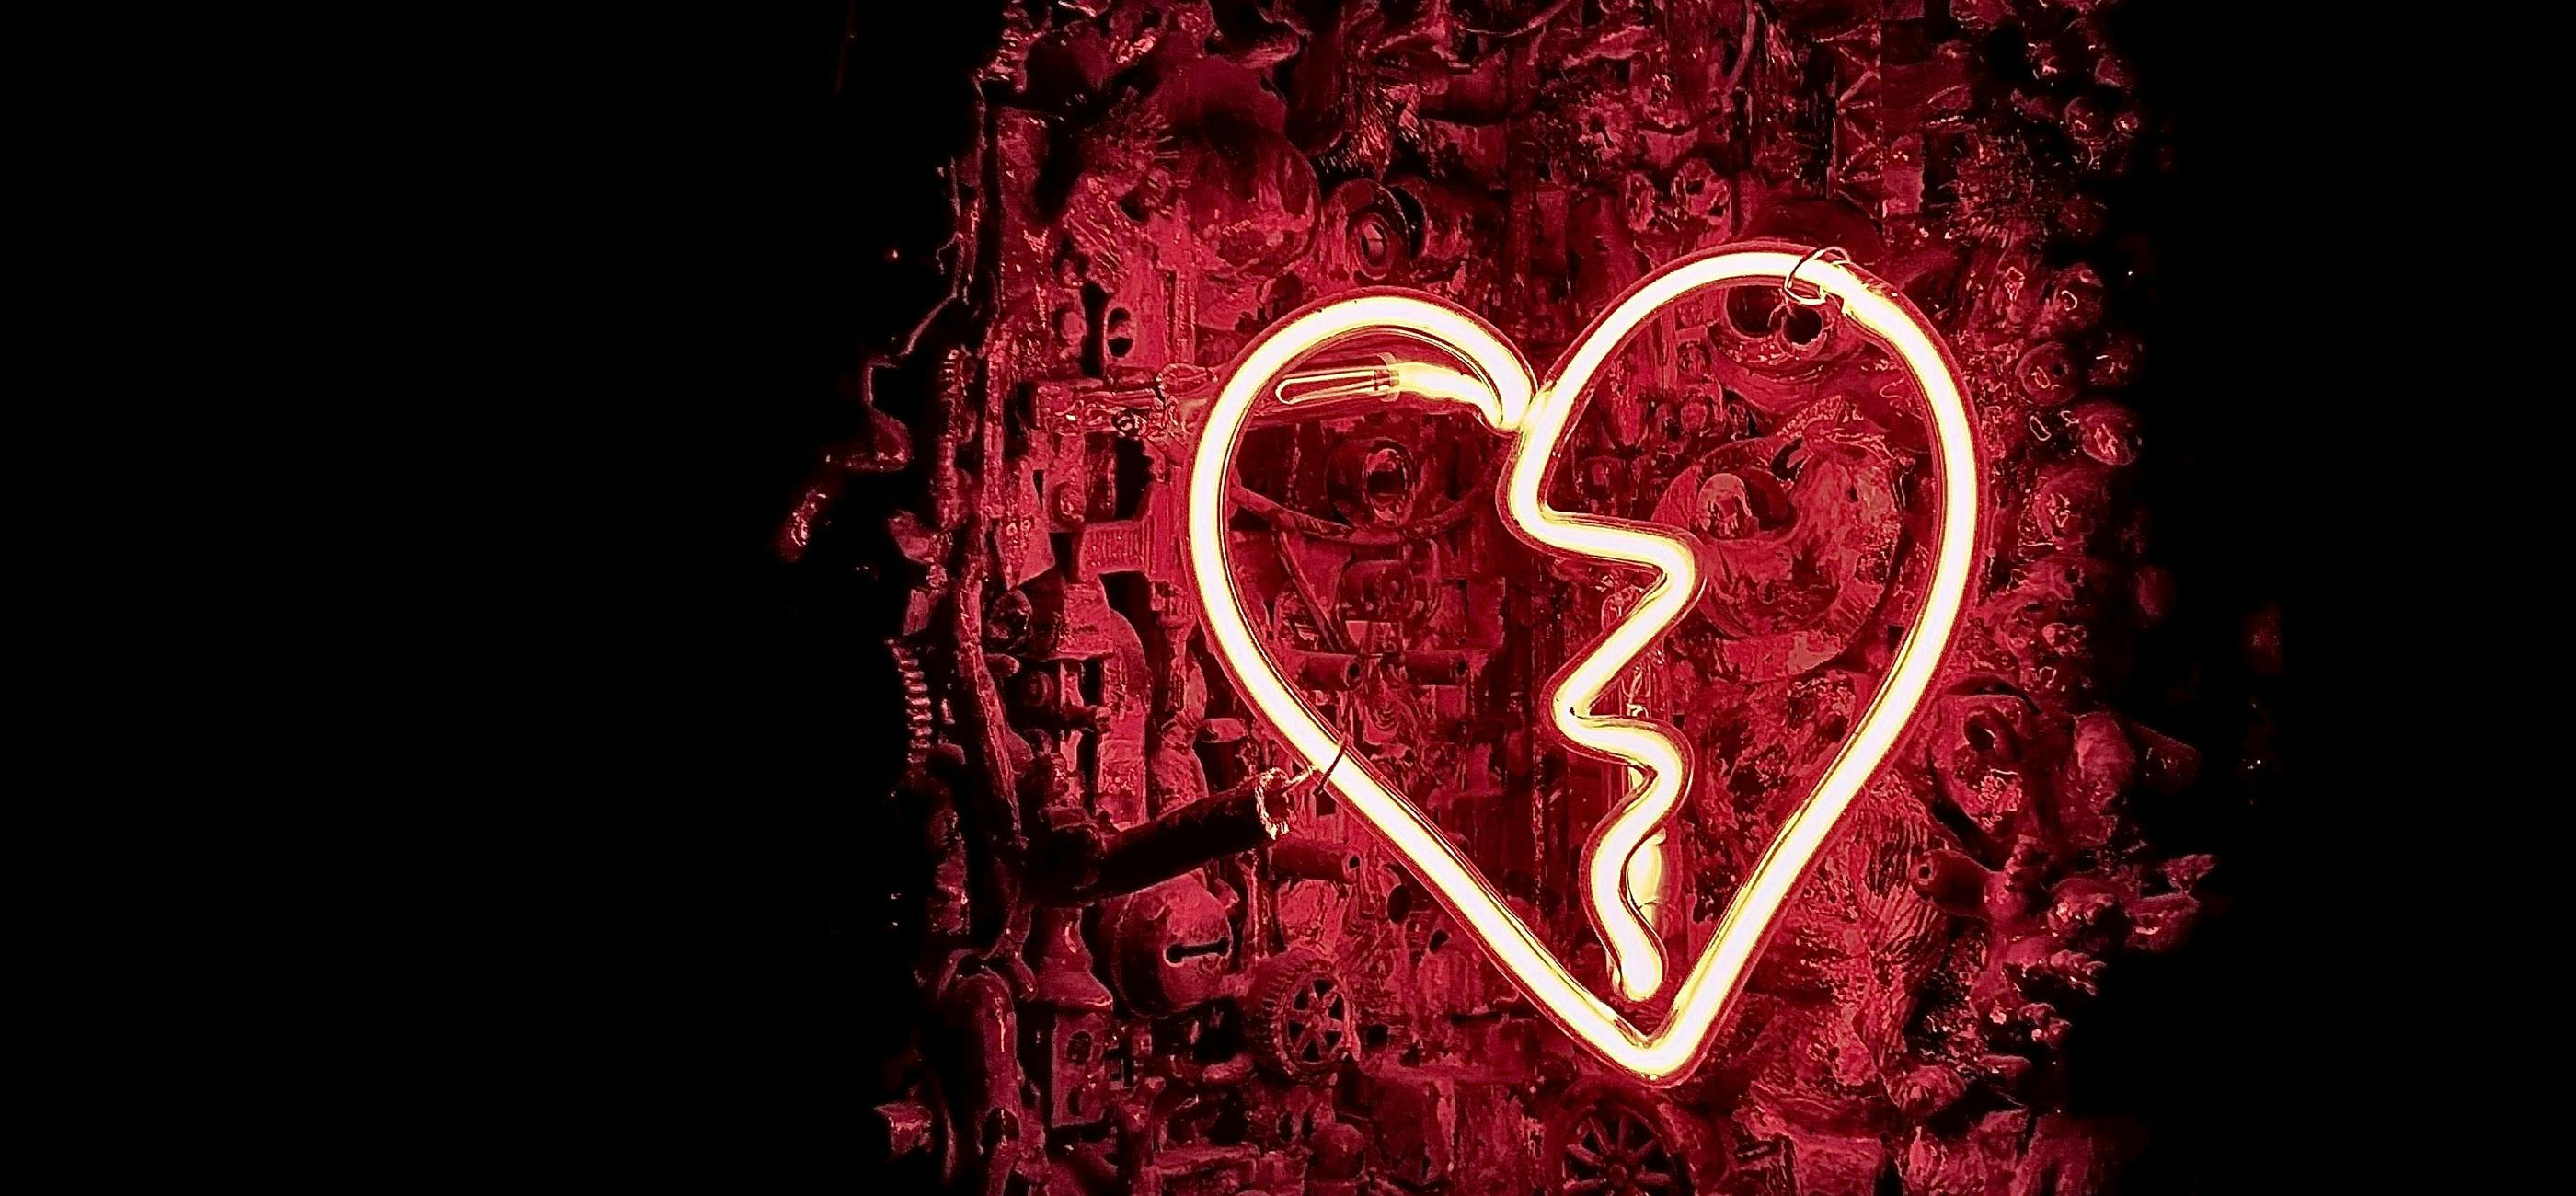 A neon heart in pink on a backdrop of red electrical items